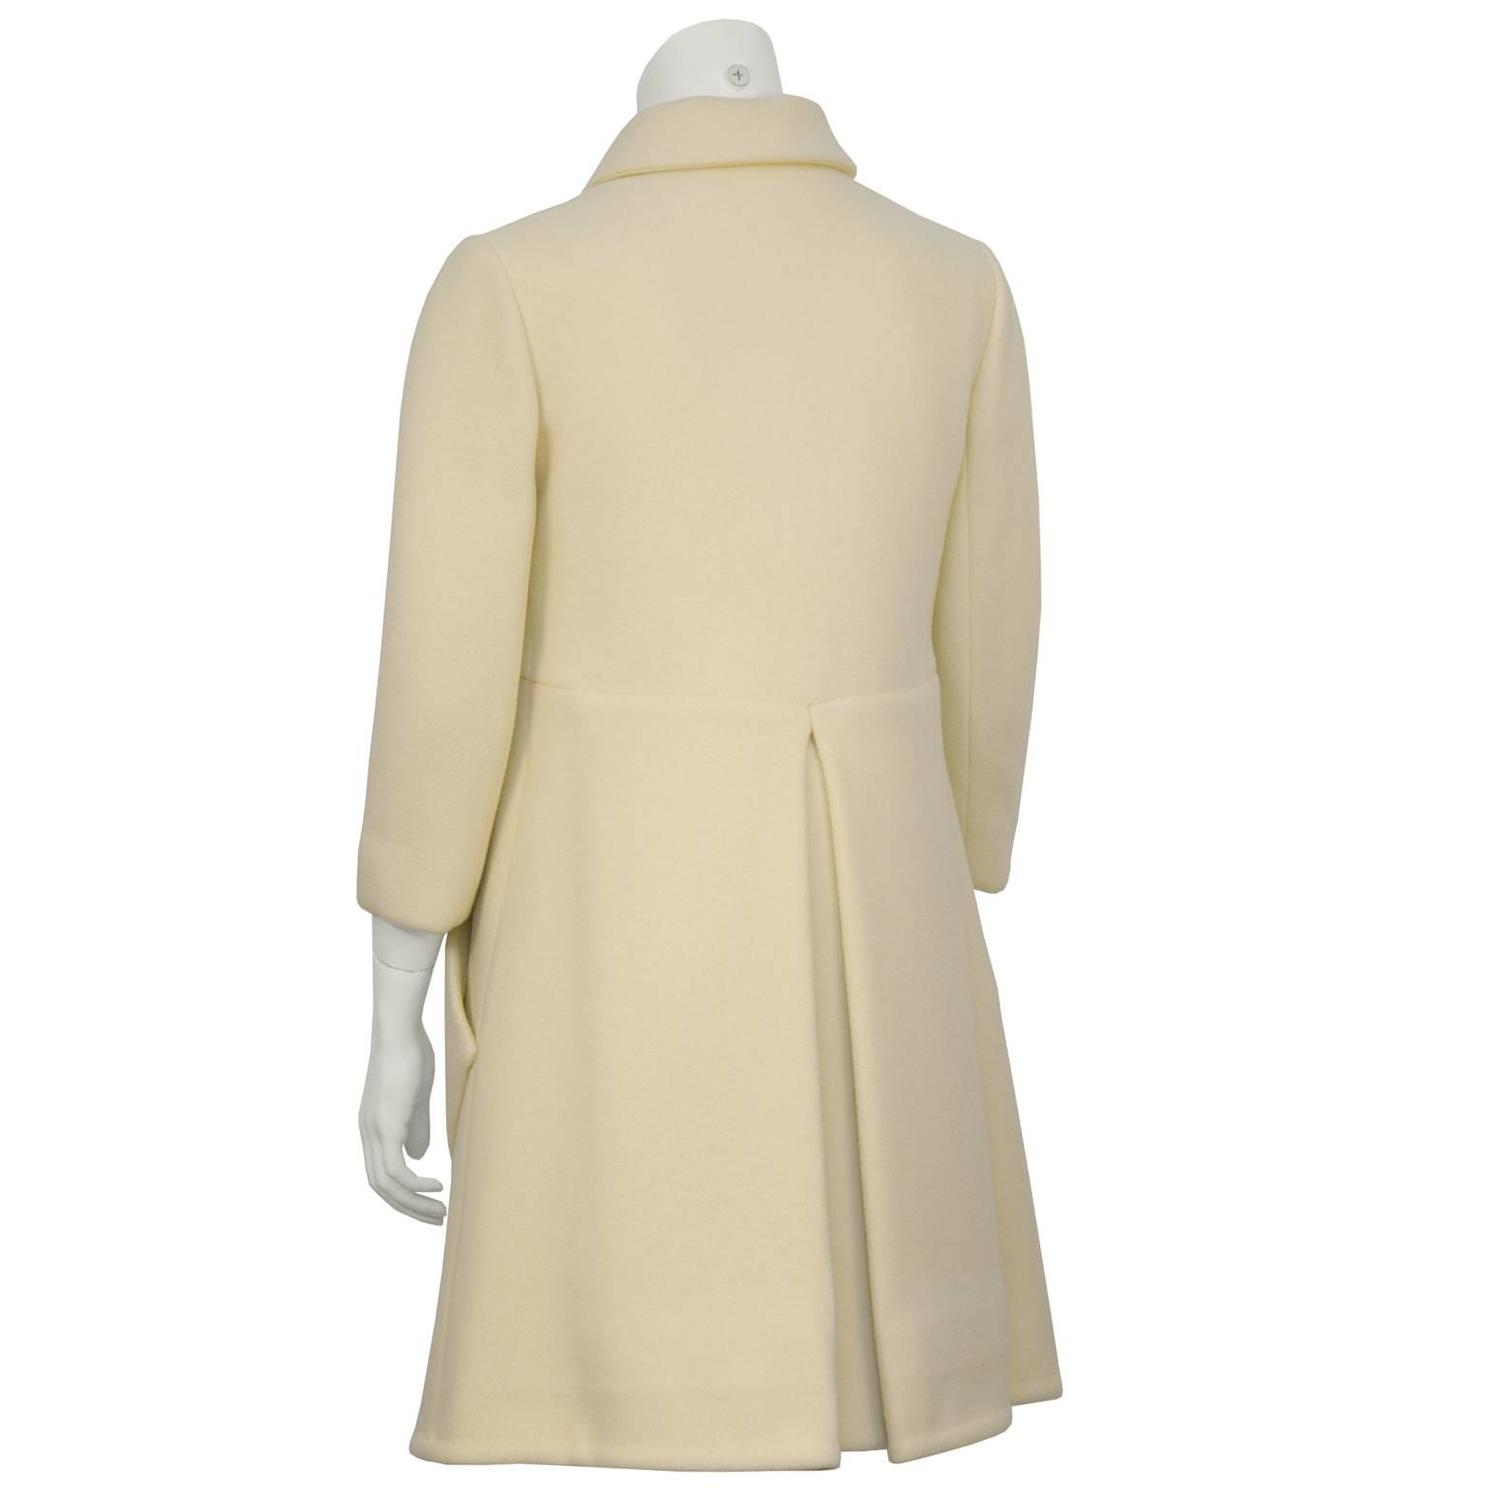 1960's Cream Wool Mod Coat with Gold Buttons For Sale at 1stdibs